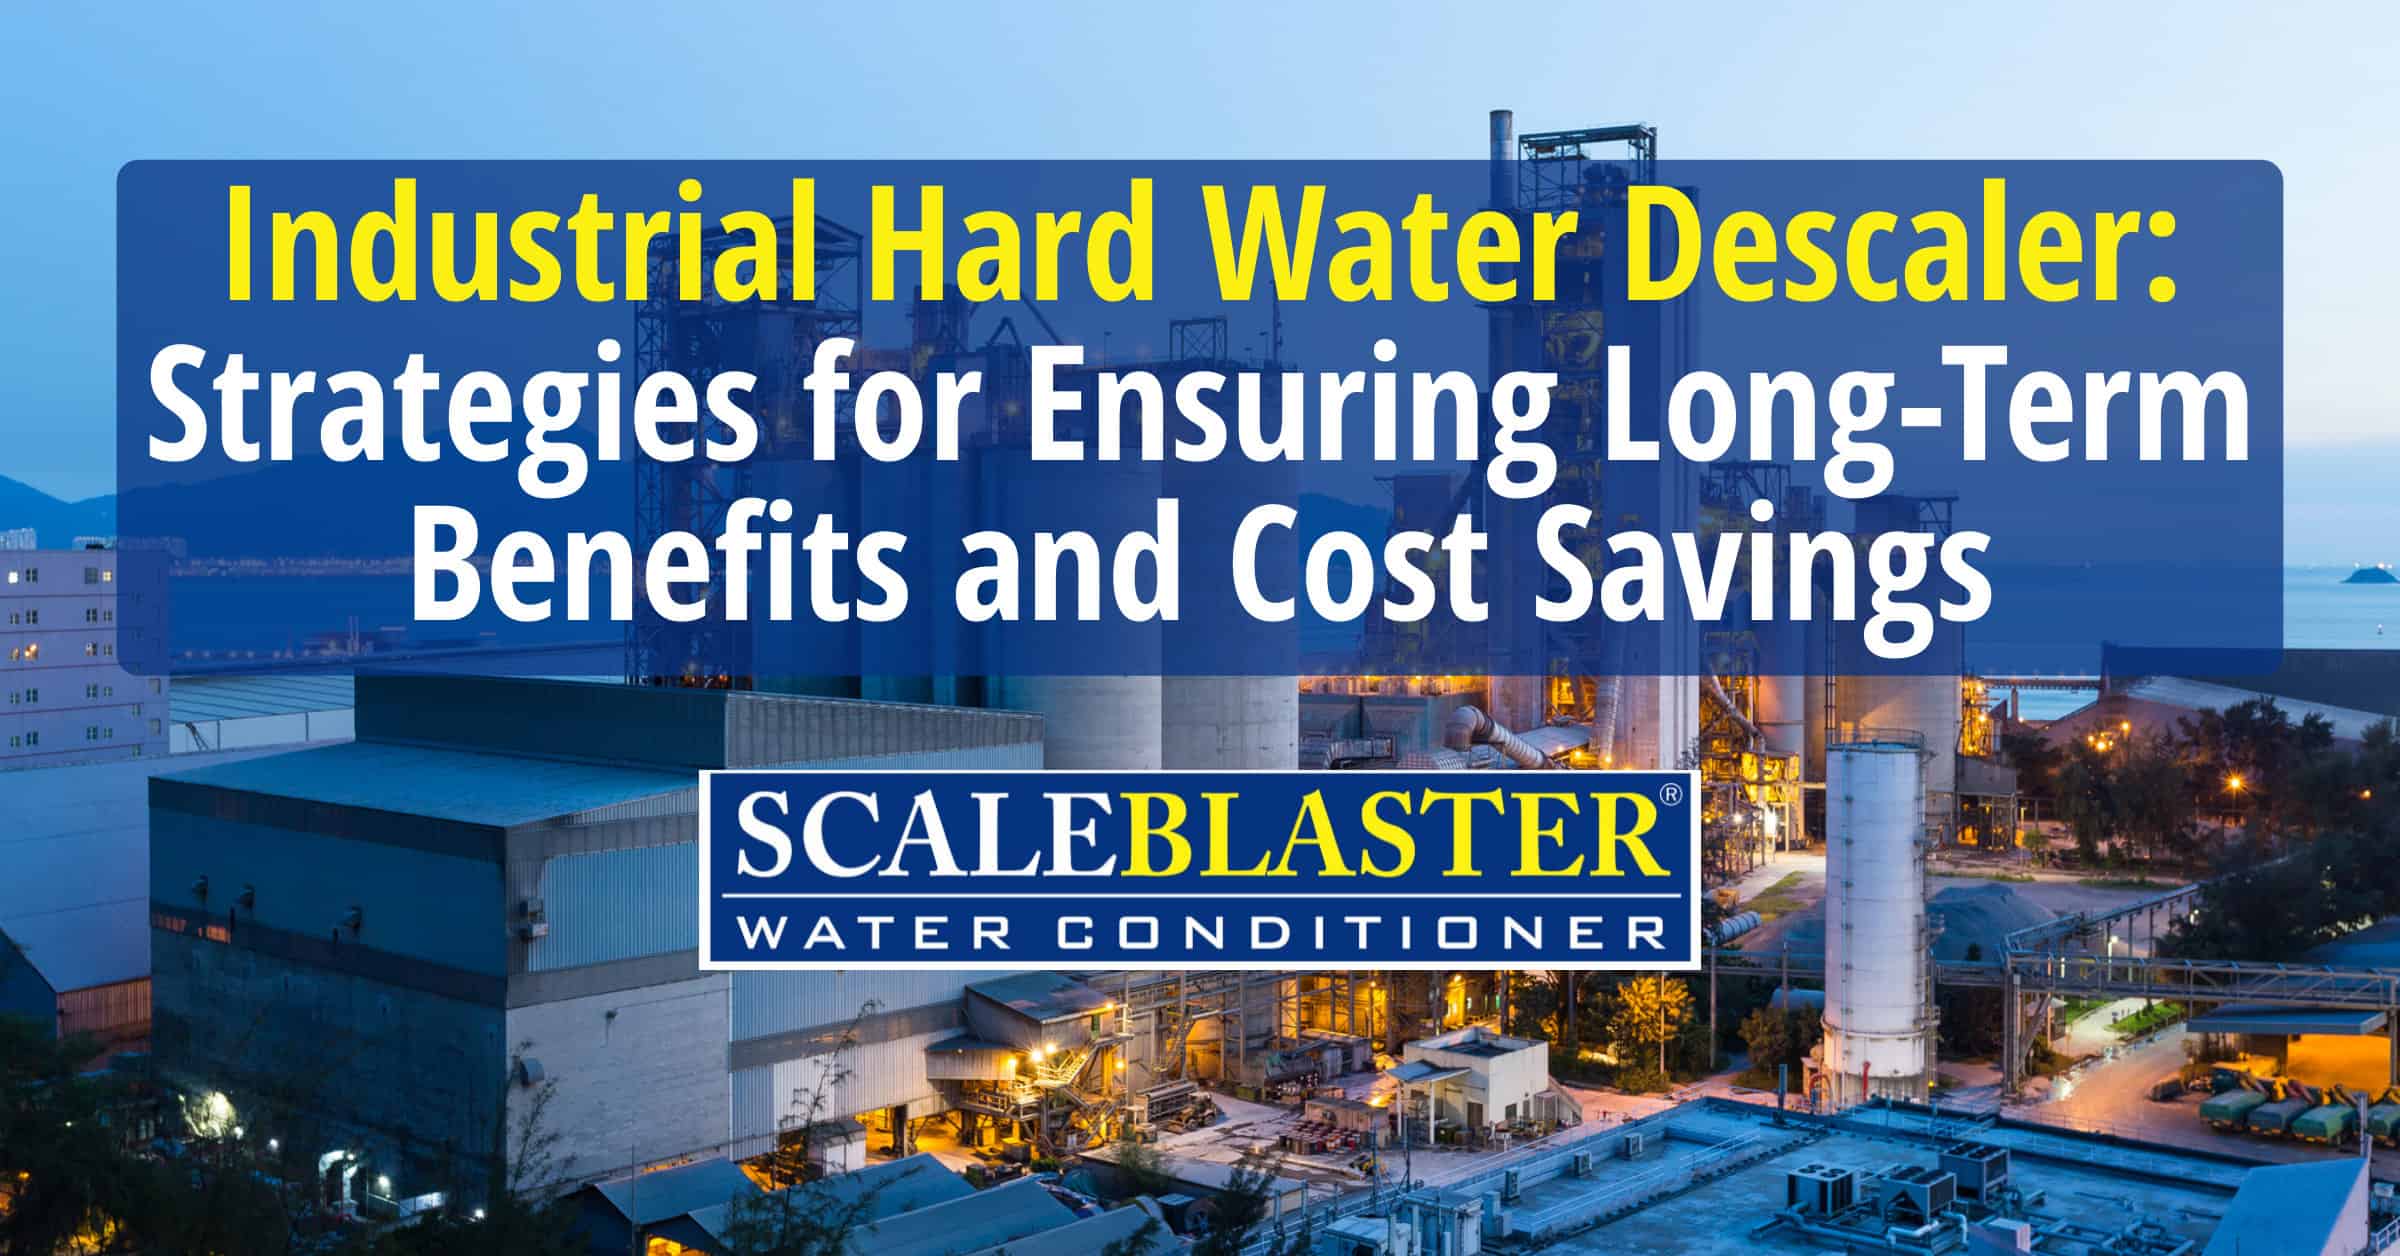 Industrial Hard Water Descaler  Strategies for Ensuring Long Term Benefits and Cost Savings - Industrial Hard Water Descaler: Strategies for Ensuring Long-Term Benefits and Cost Savings